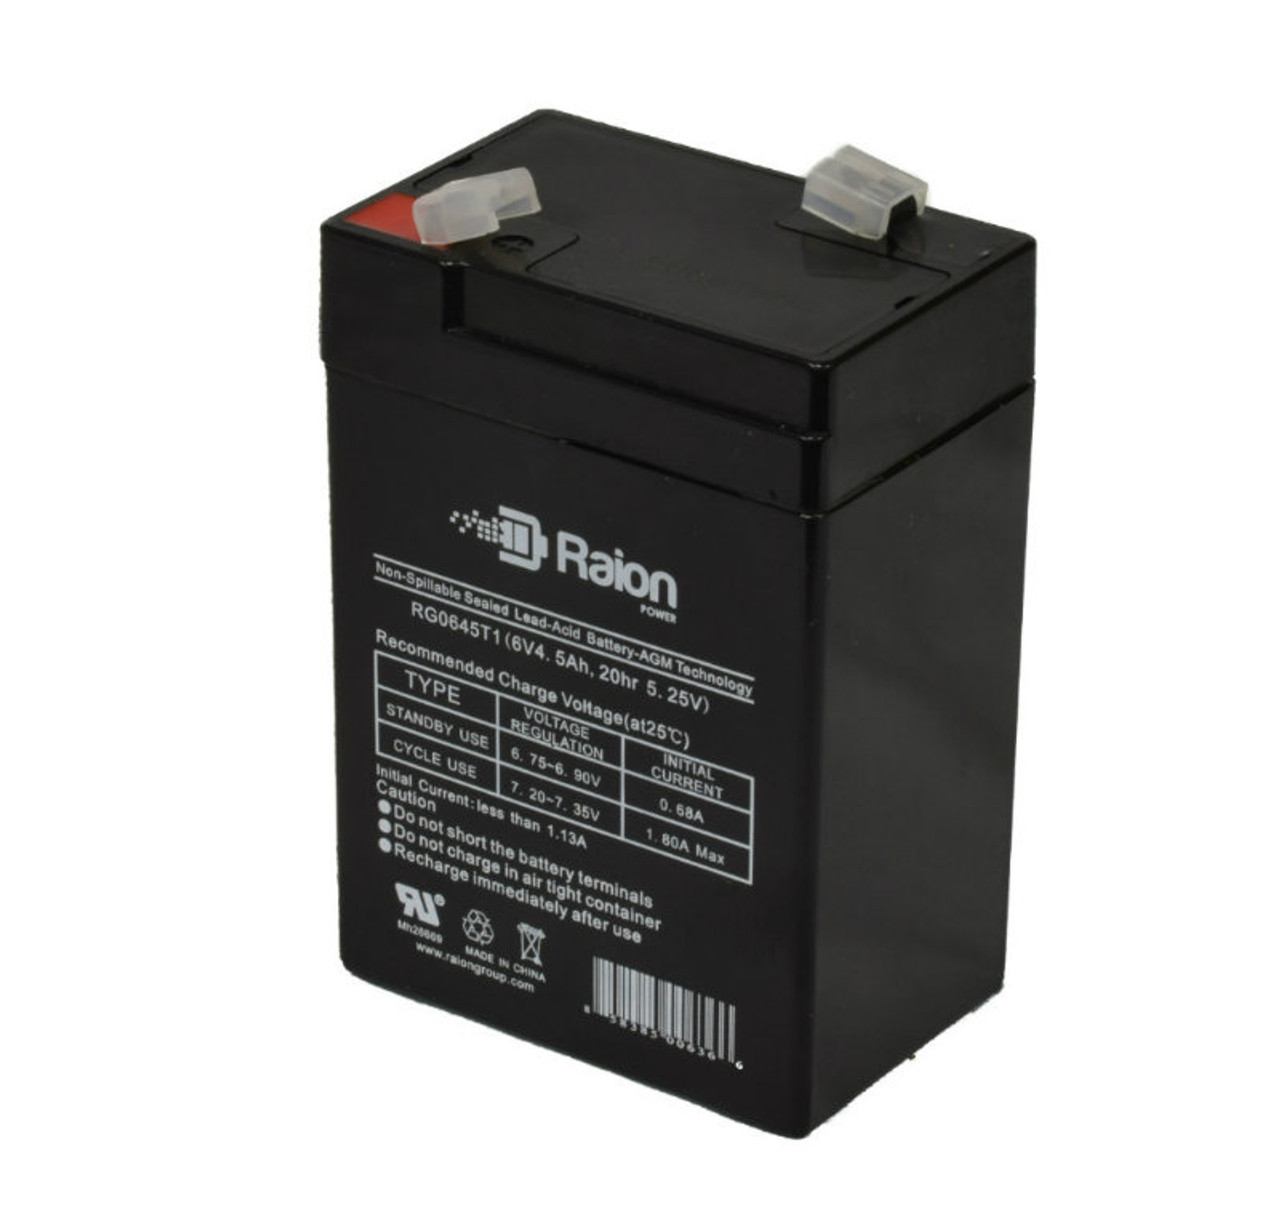 Raion Power RG0645T1 6V 4.5Ah Replacement Battery Cartridge for Double Tech DB6-5